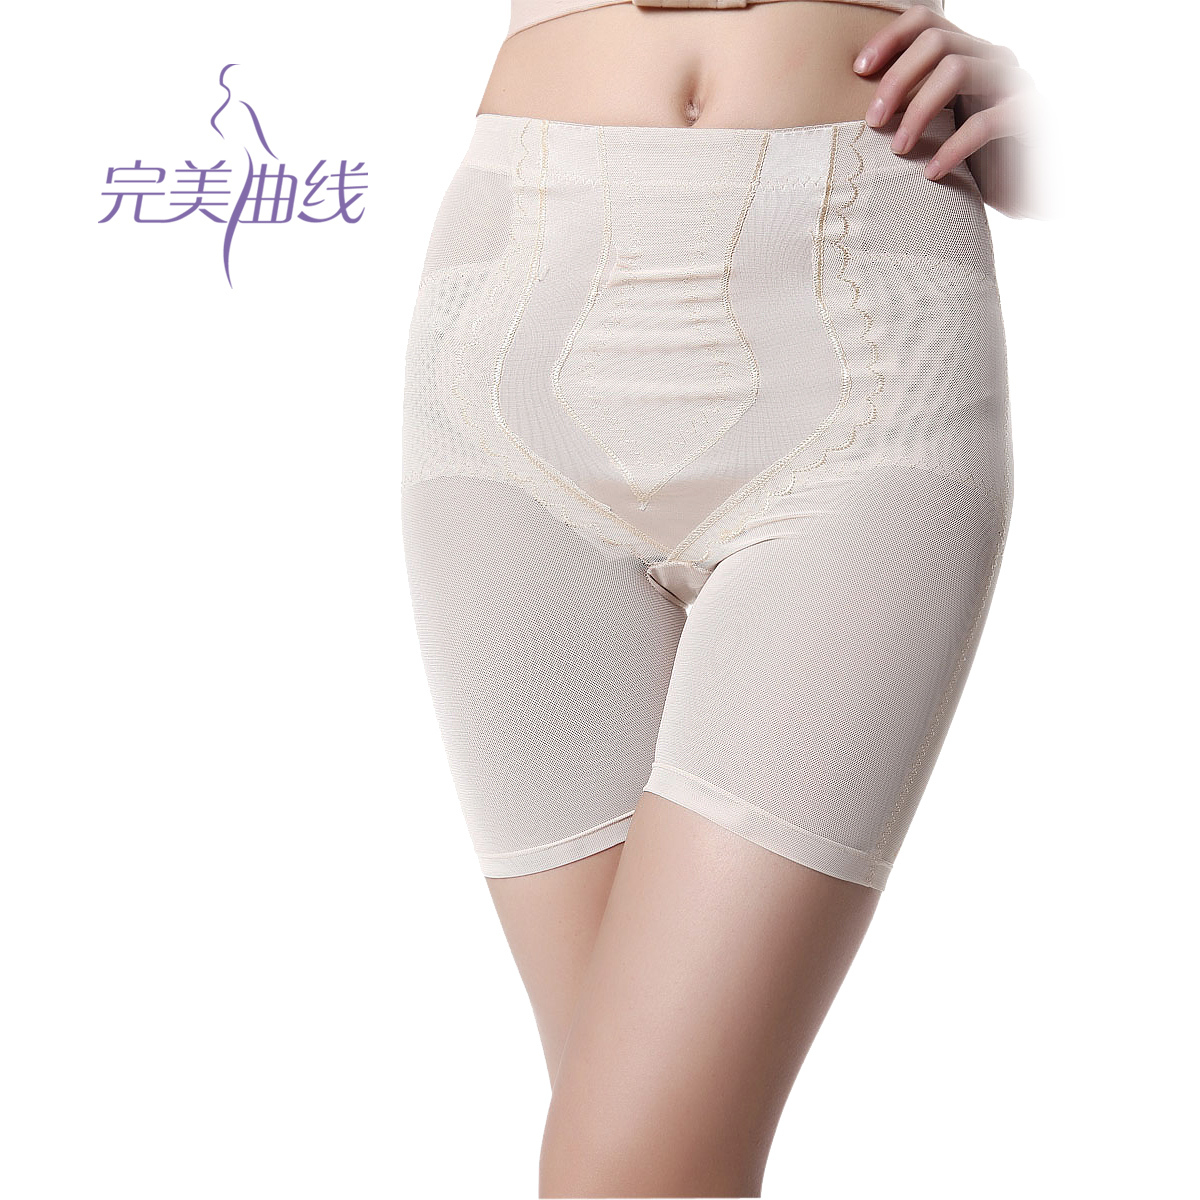 Perfect curve seamless tight fitting postpartum body shaping pants corset slimming panties female 8302 waist corset